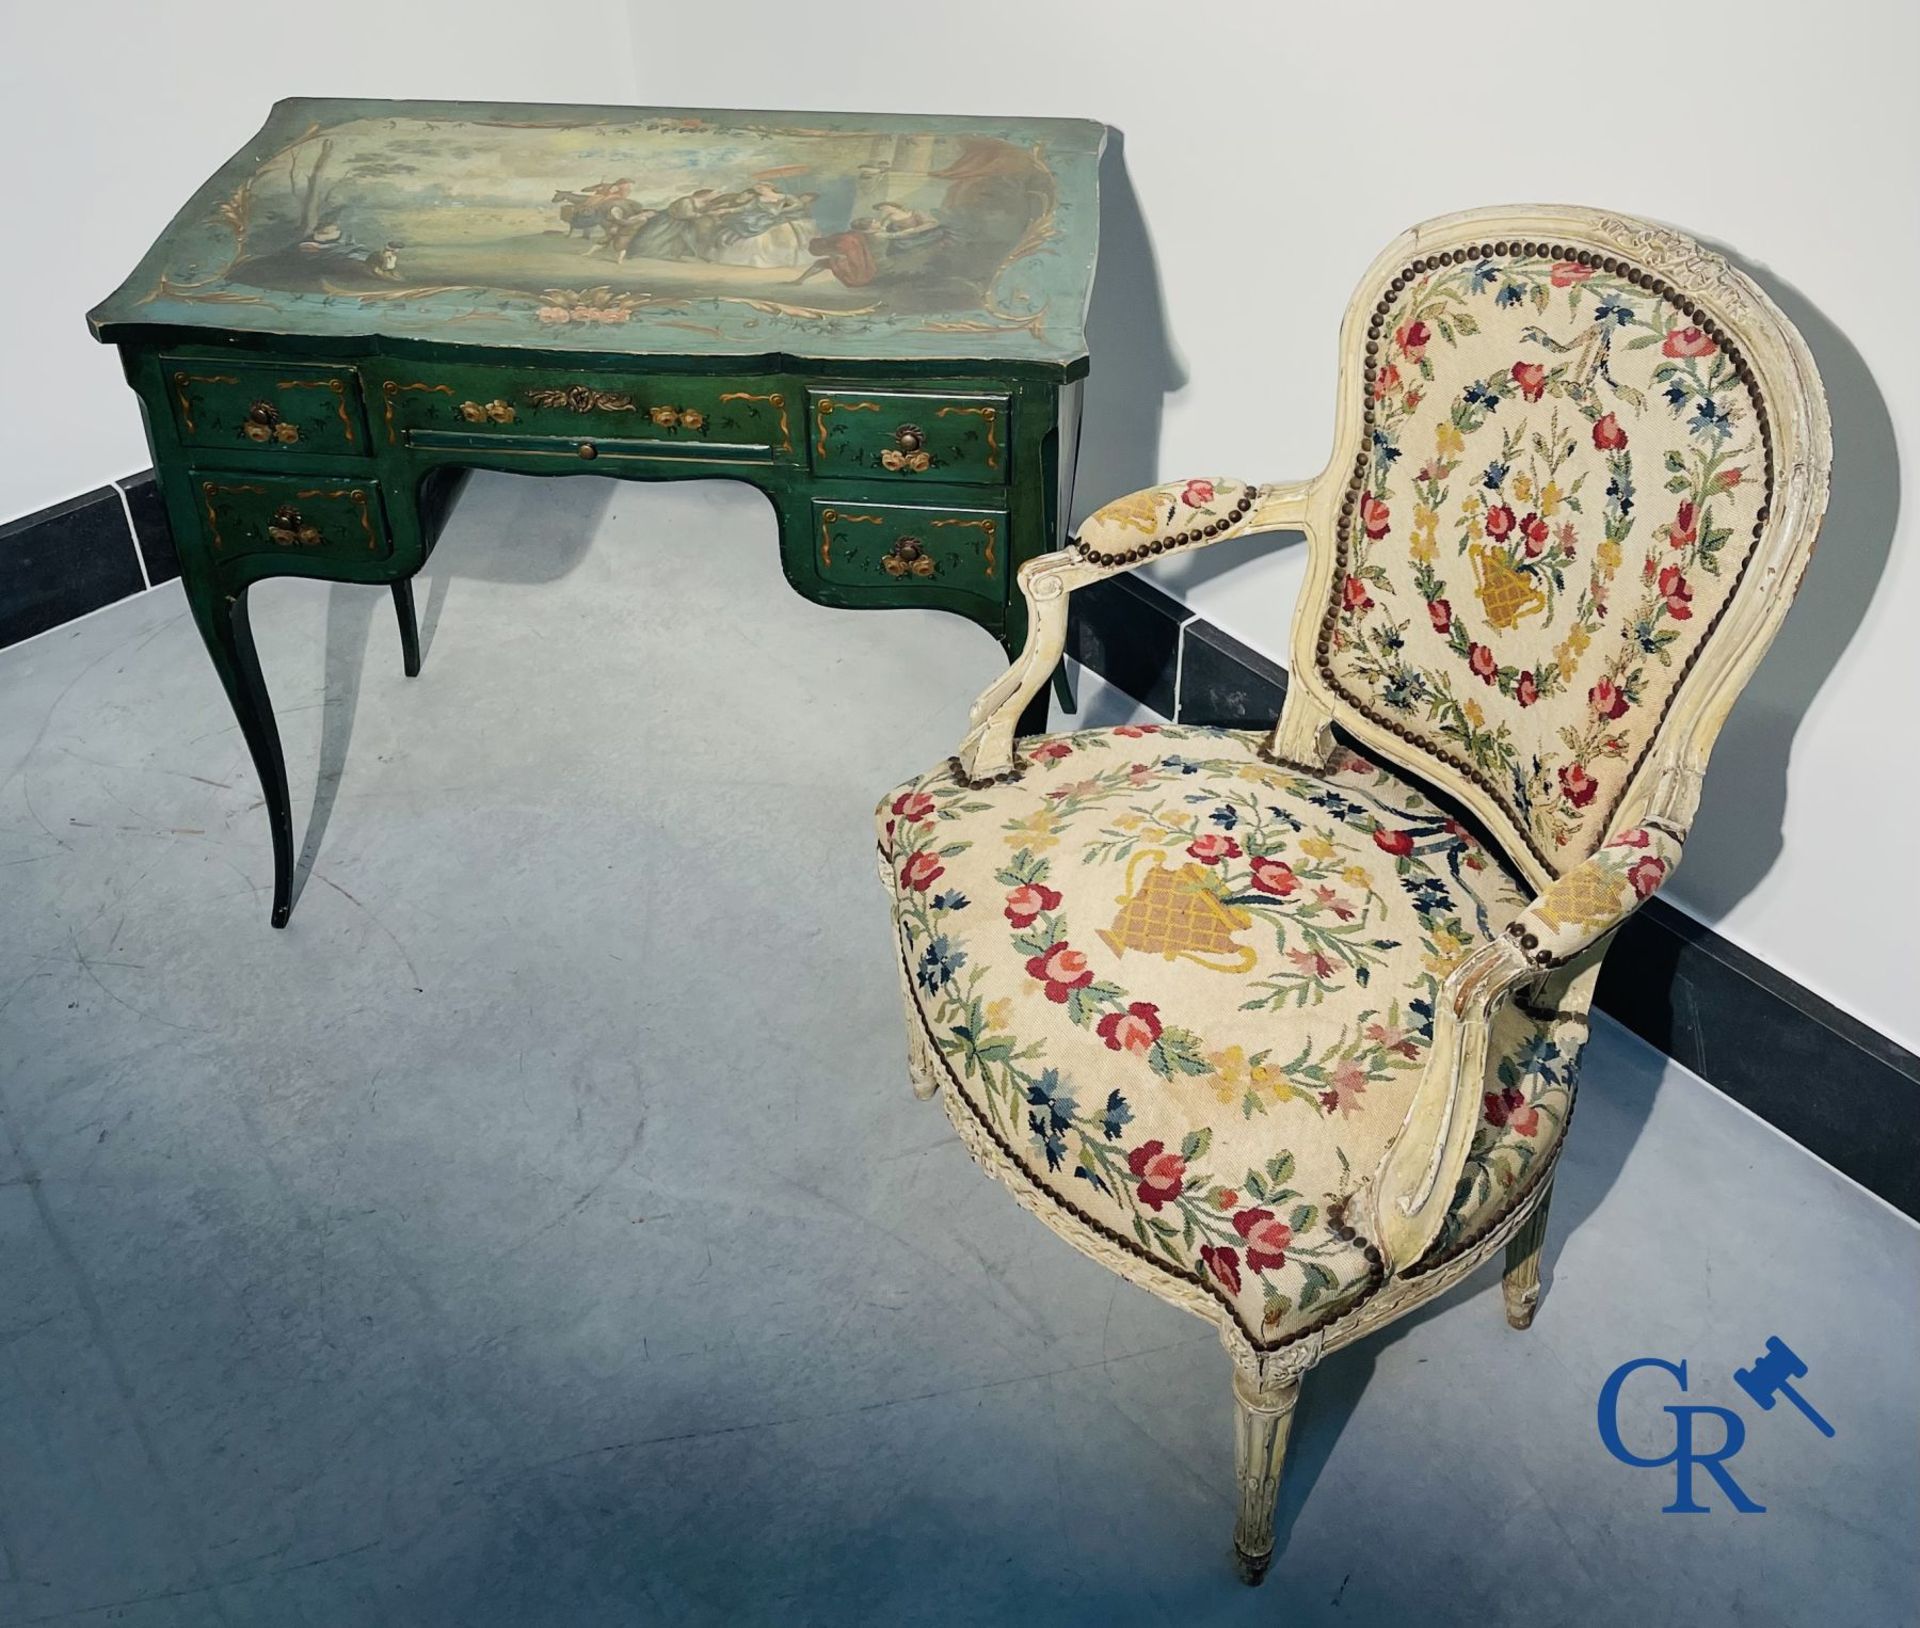 Ladies dressing table with gallant paintings, and a lacquered armchair transitional period Louis XV  - Bild 8 aus 17